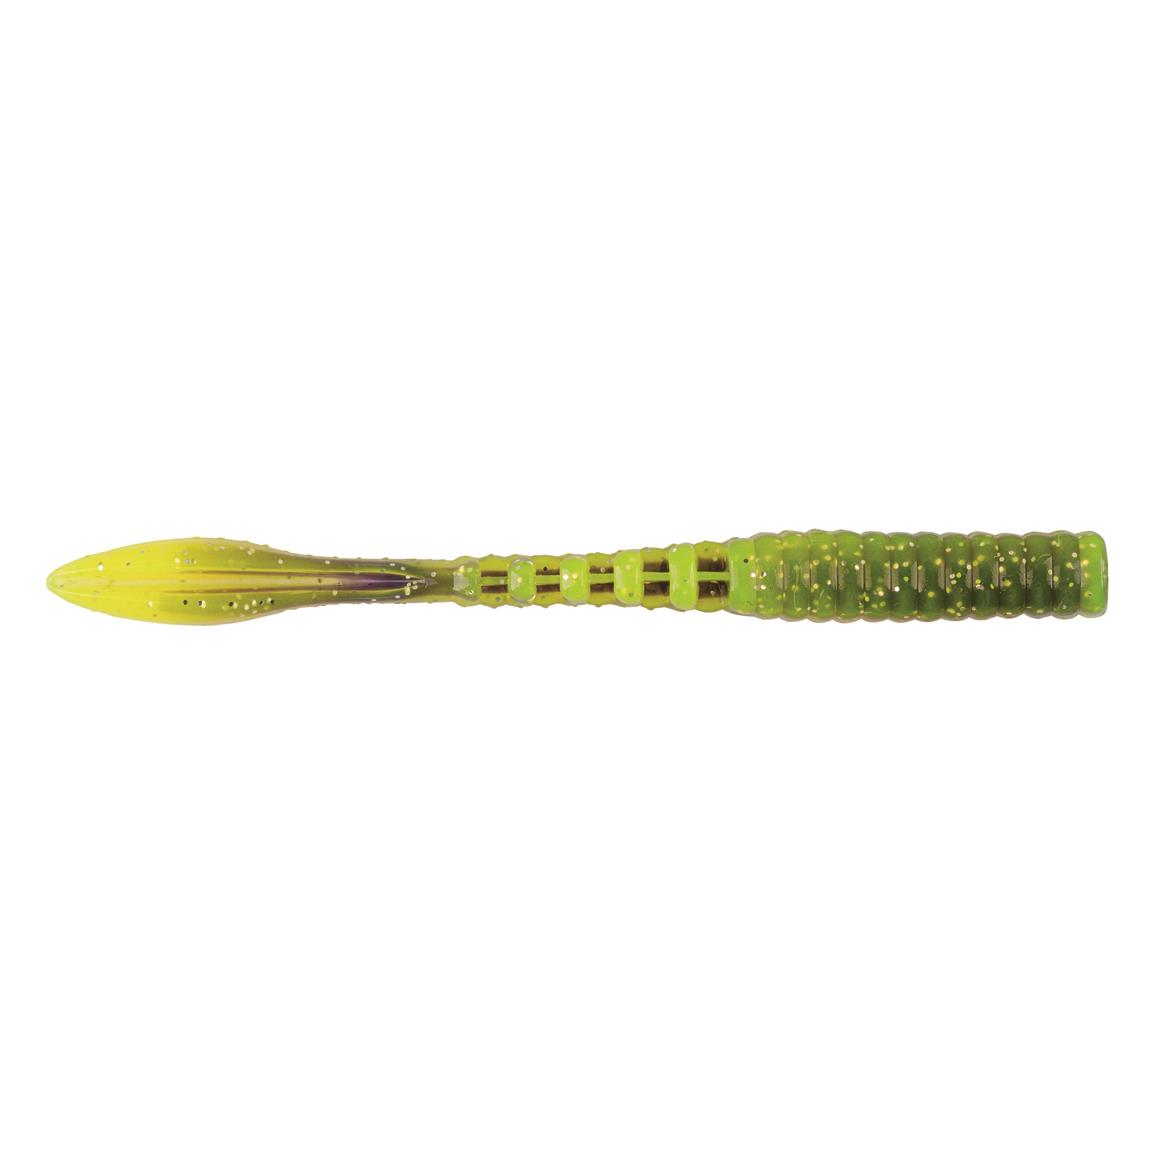 Northland Eye-Candy 3.5" Jig Crawlers, 5 Pack, Purple Chartreuse